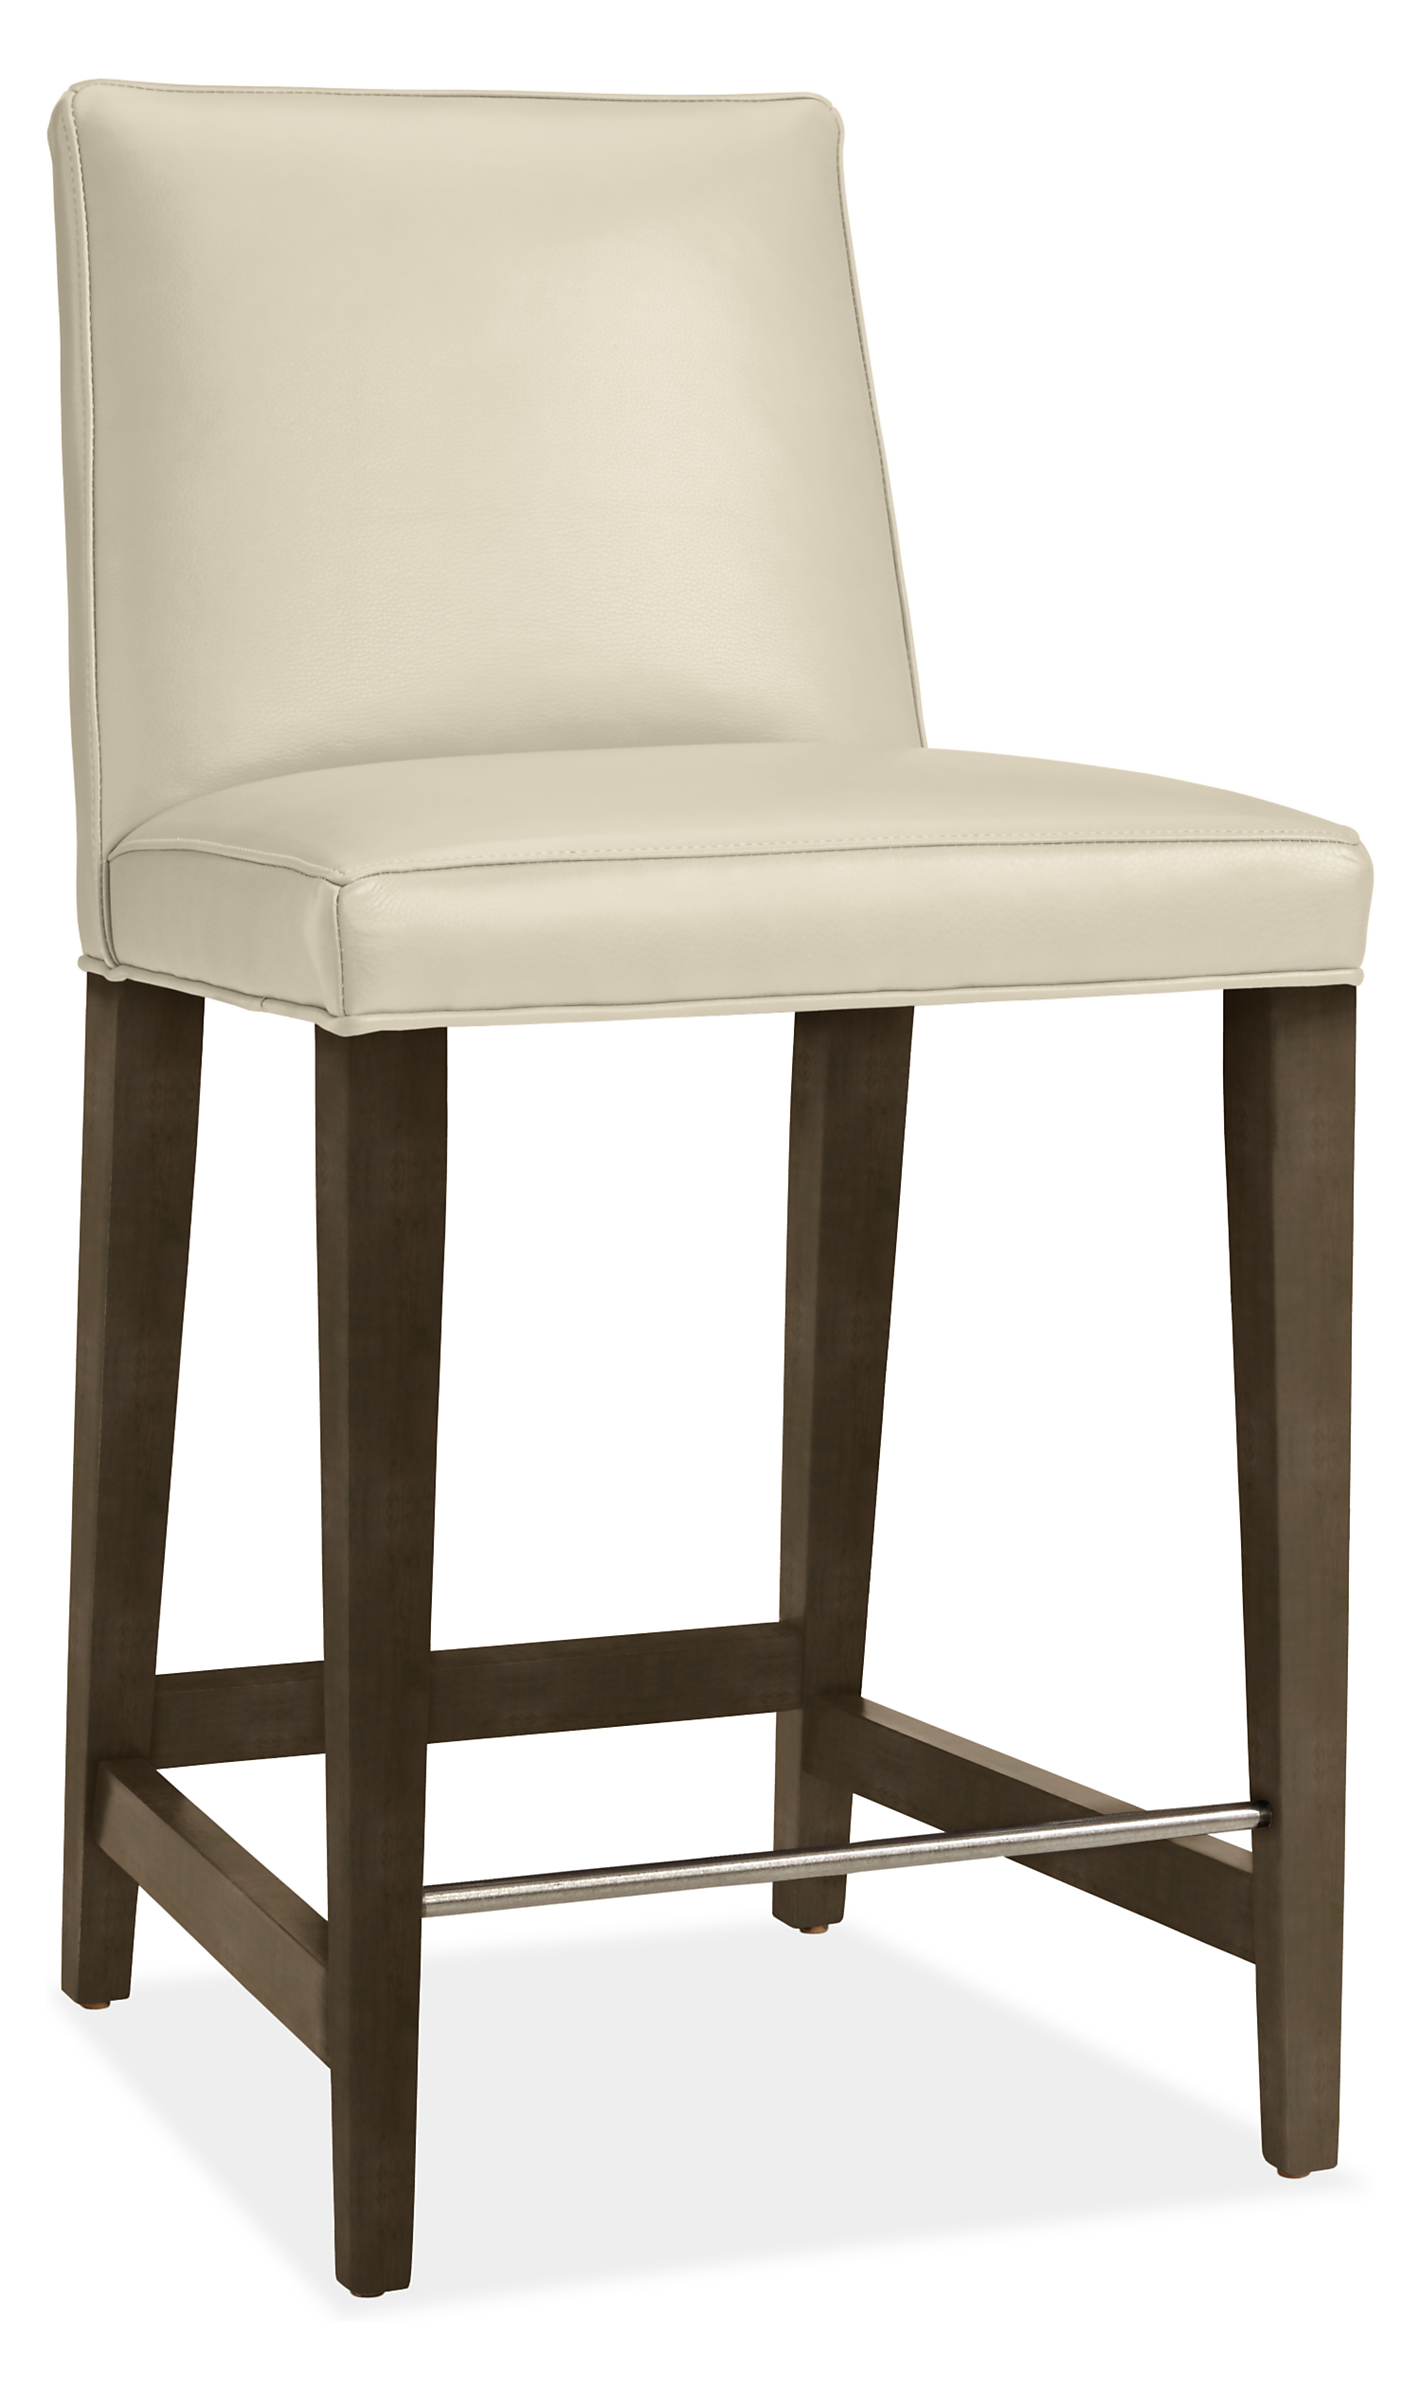 Ava Leather Counter & Bar Stools